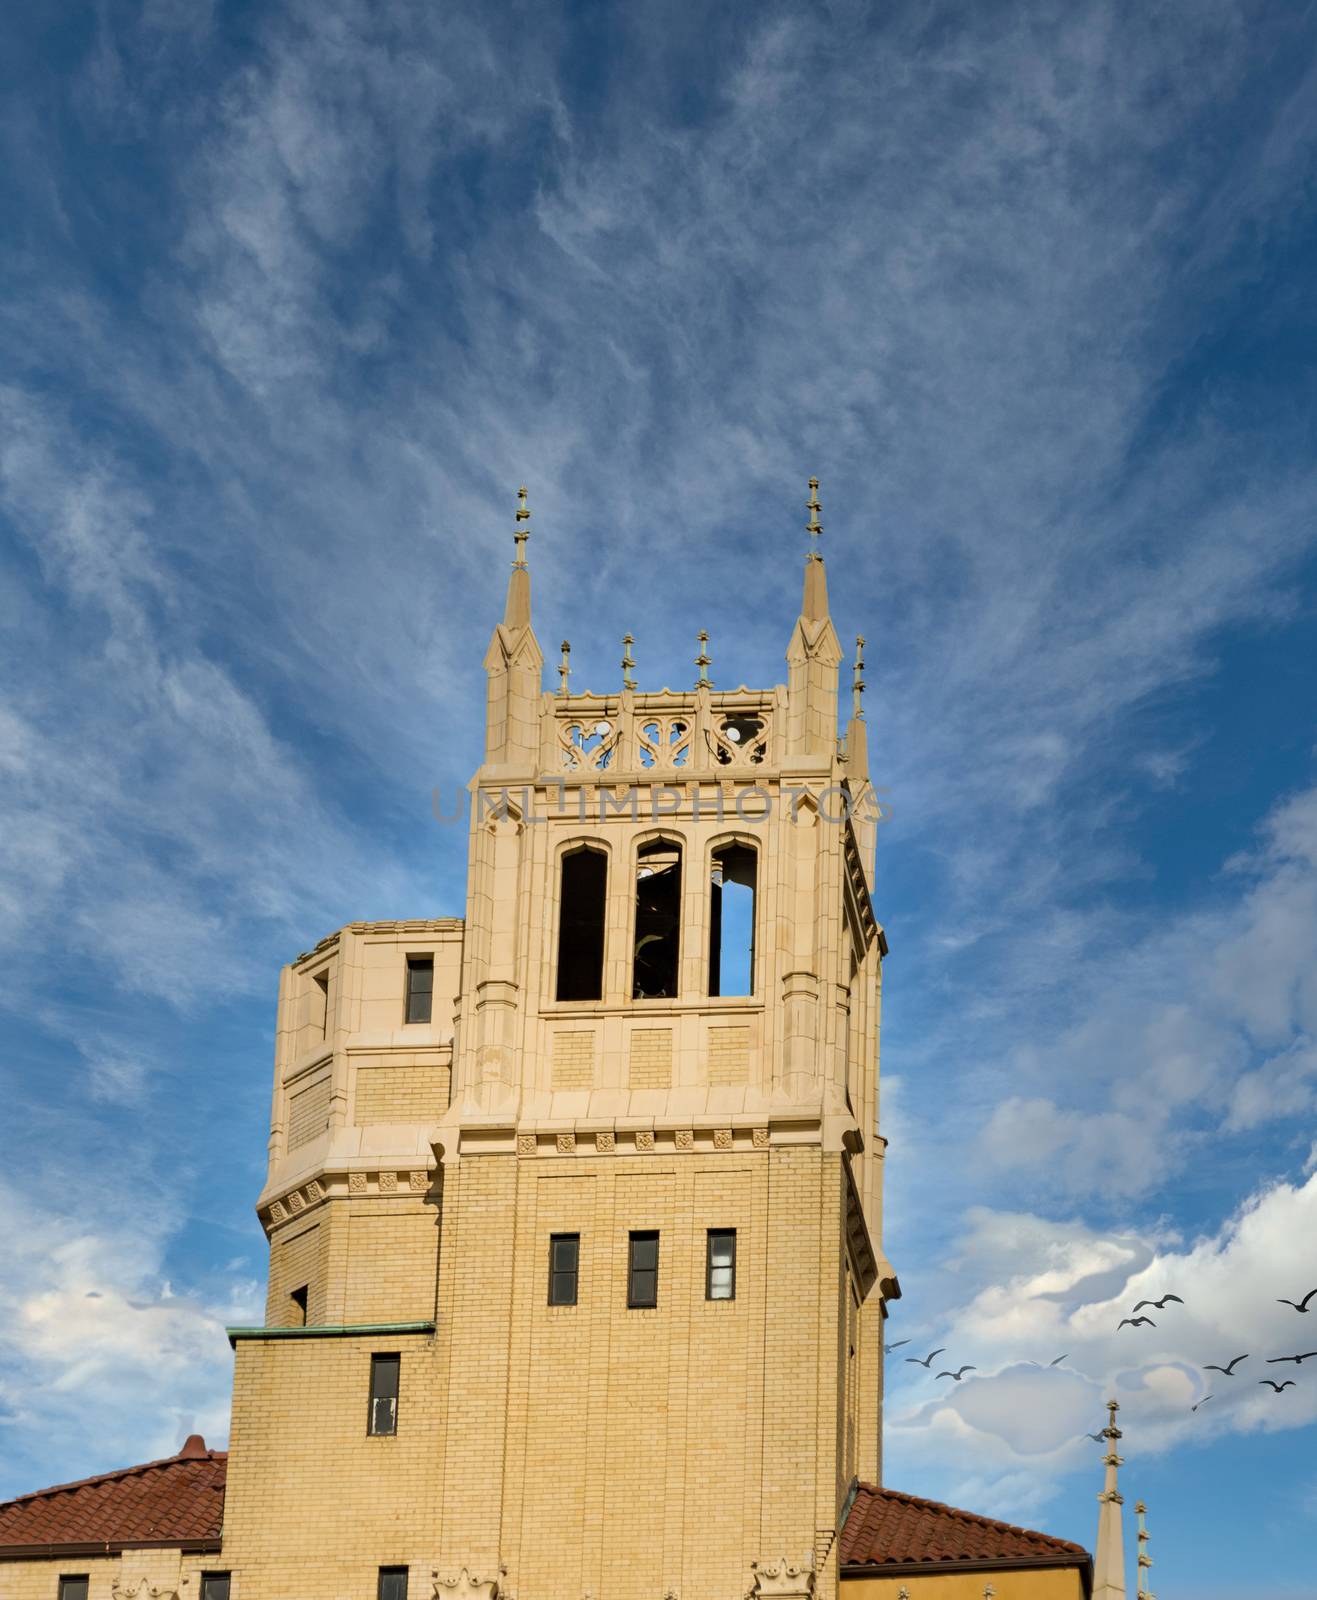 A Bell tower in Asheville, North Carolina against Nice Sky